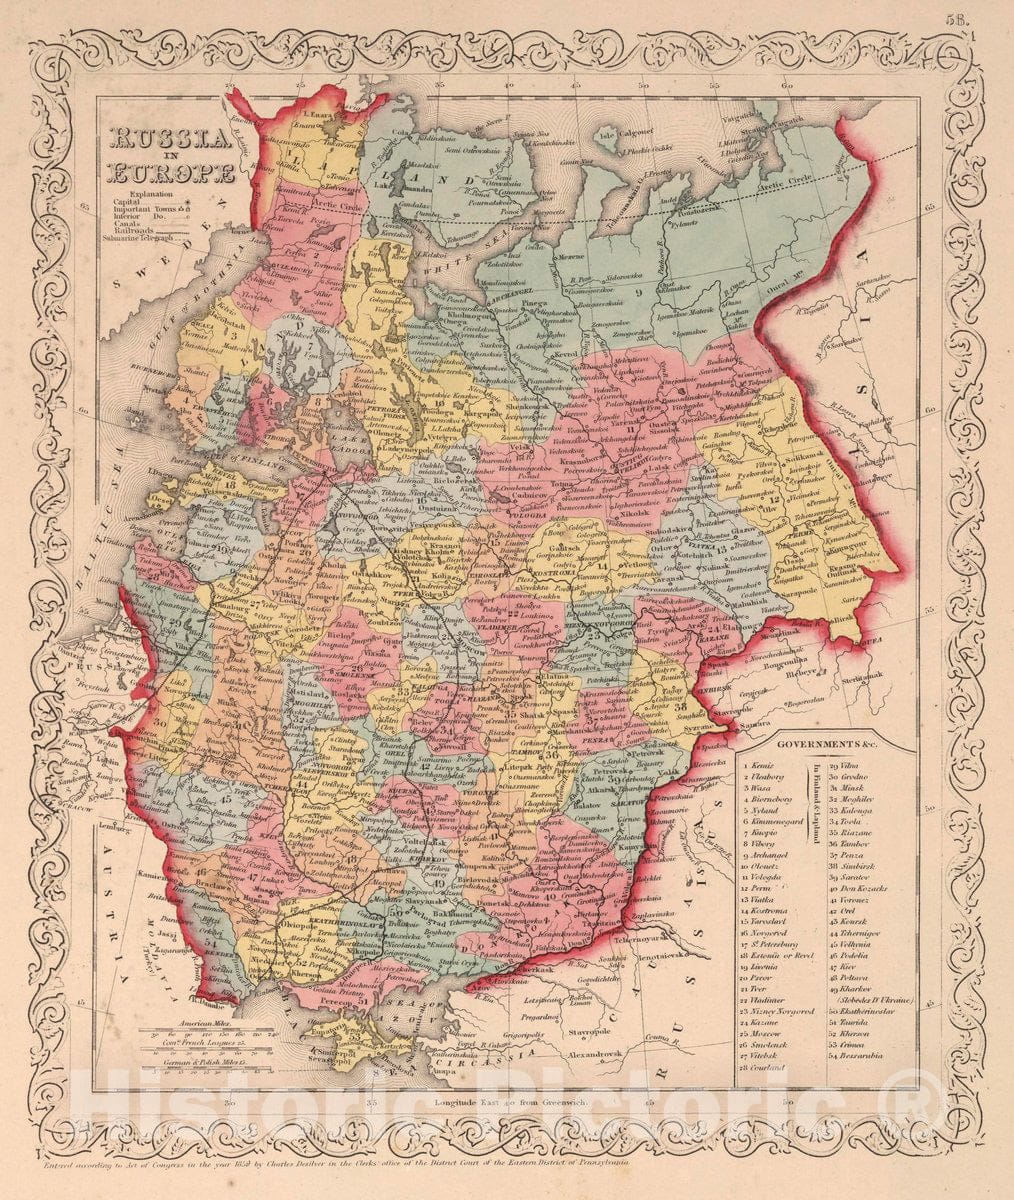 Historic Map : Russia in Europe. 58, 1856 Atlas - Vintage Wall Art